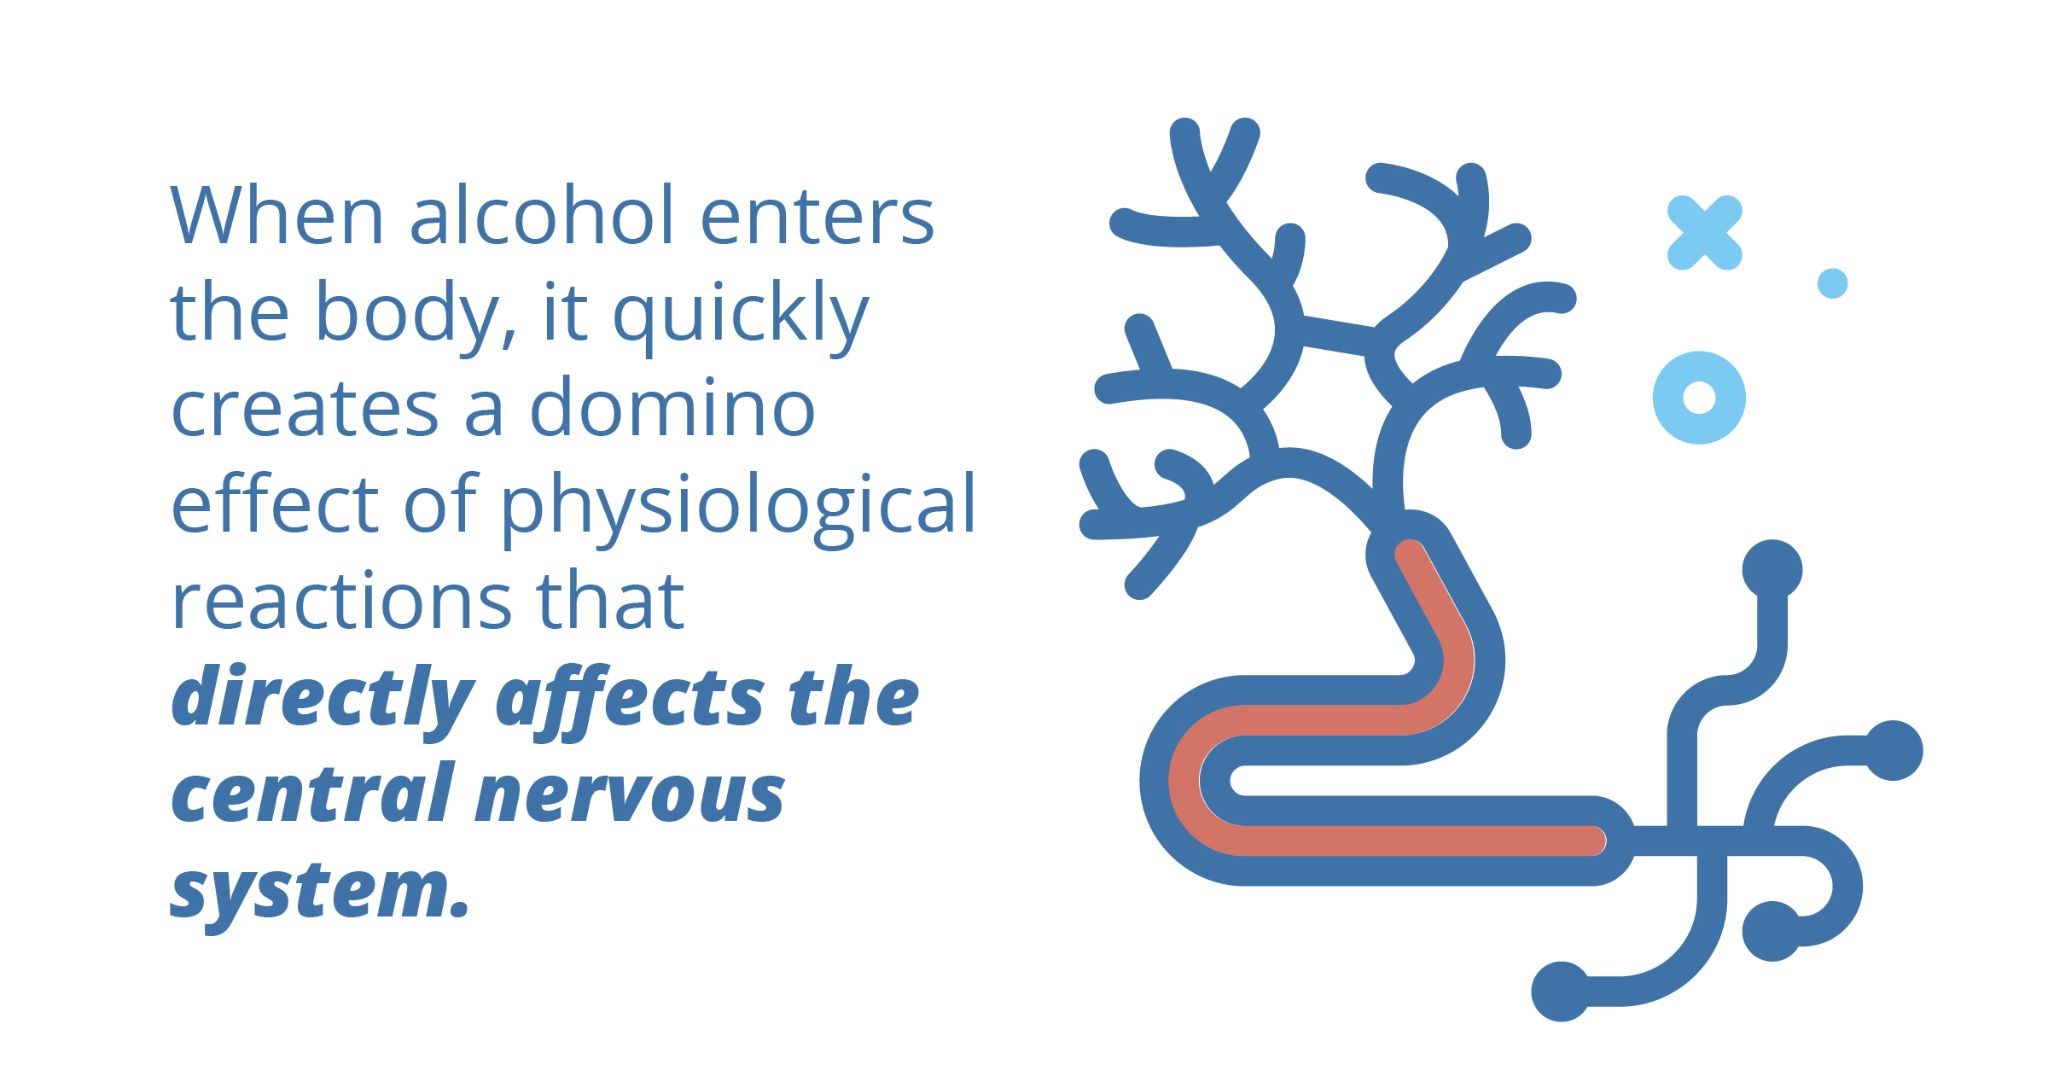 When alcohol enters the body, it quickly creates a domino effect of physiological reactions that directly affects the central nervous system.